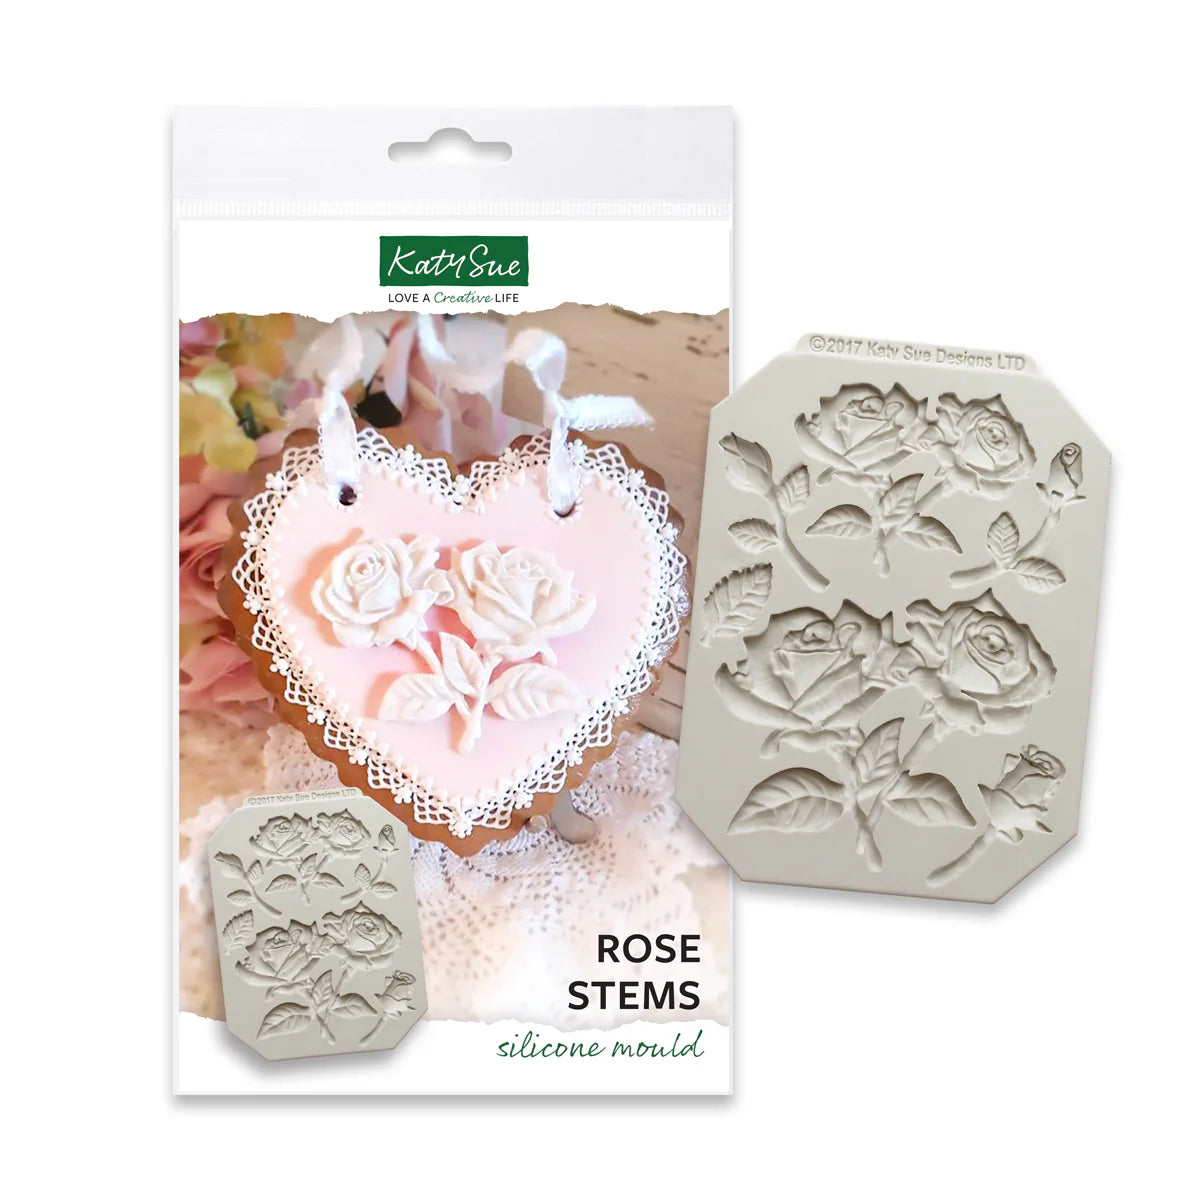 Rose Stems Silicone Mould